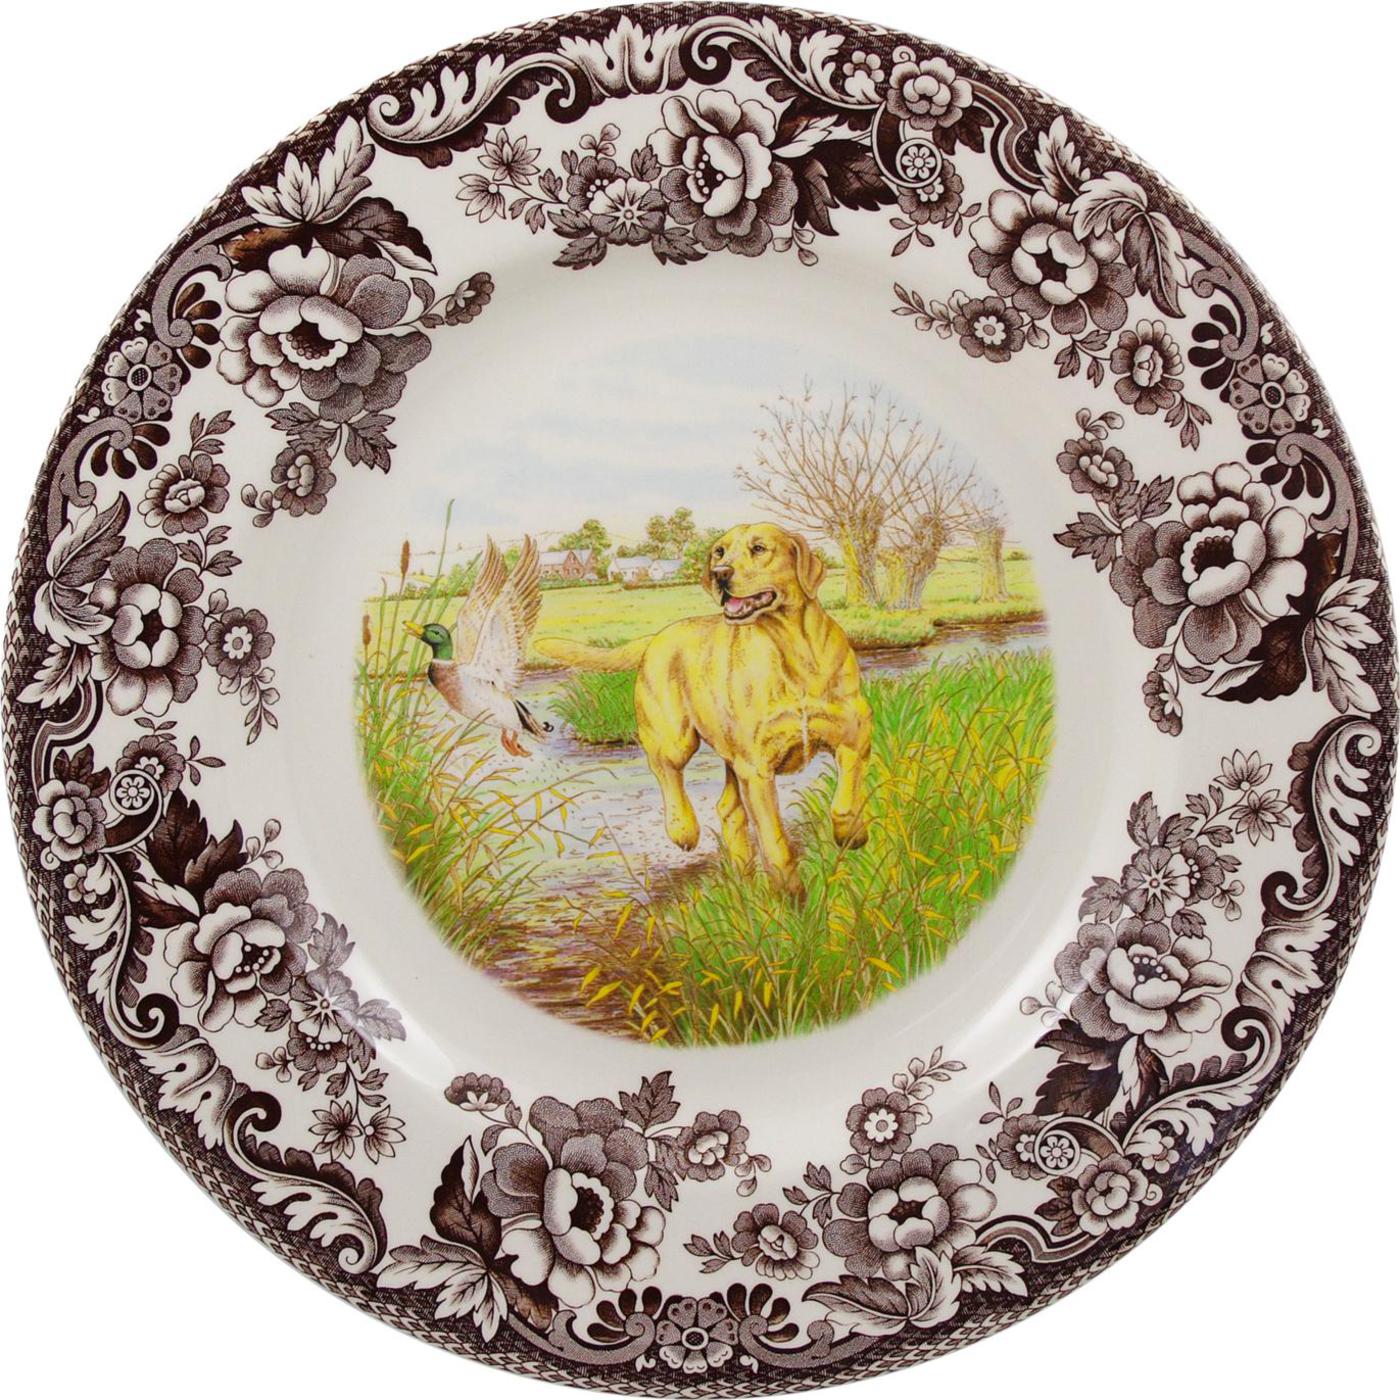 Woodland Dinner Plate 10.5 Inch, Yellow Labrador Retriever image number null